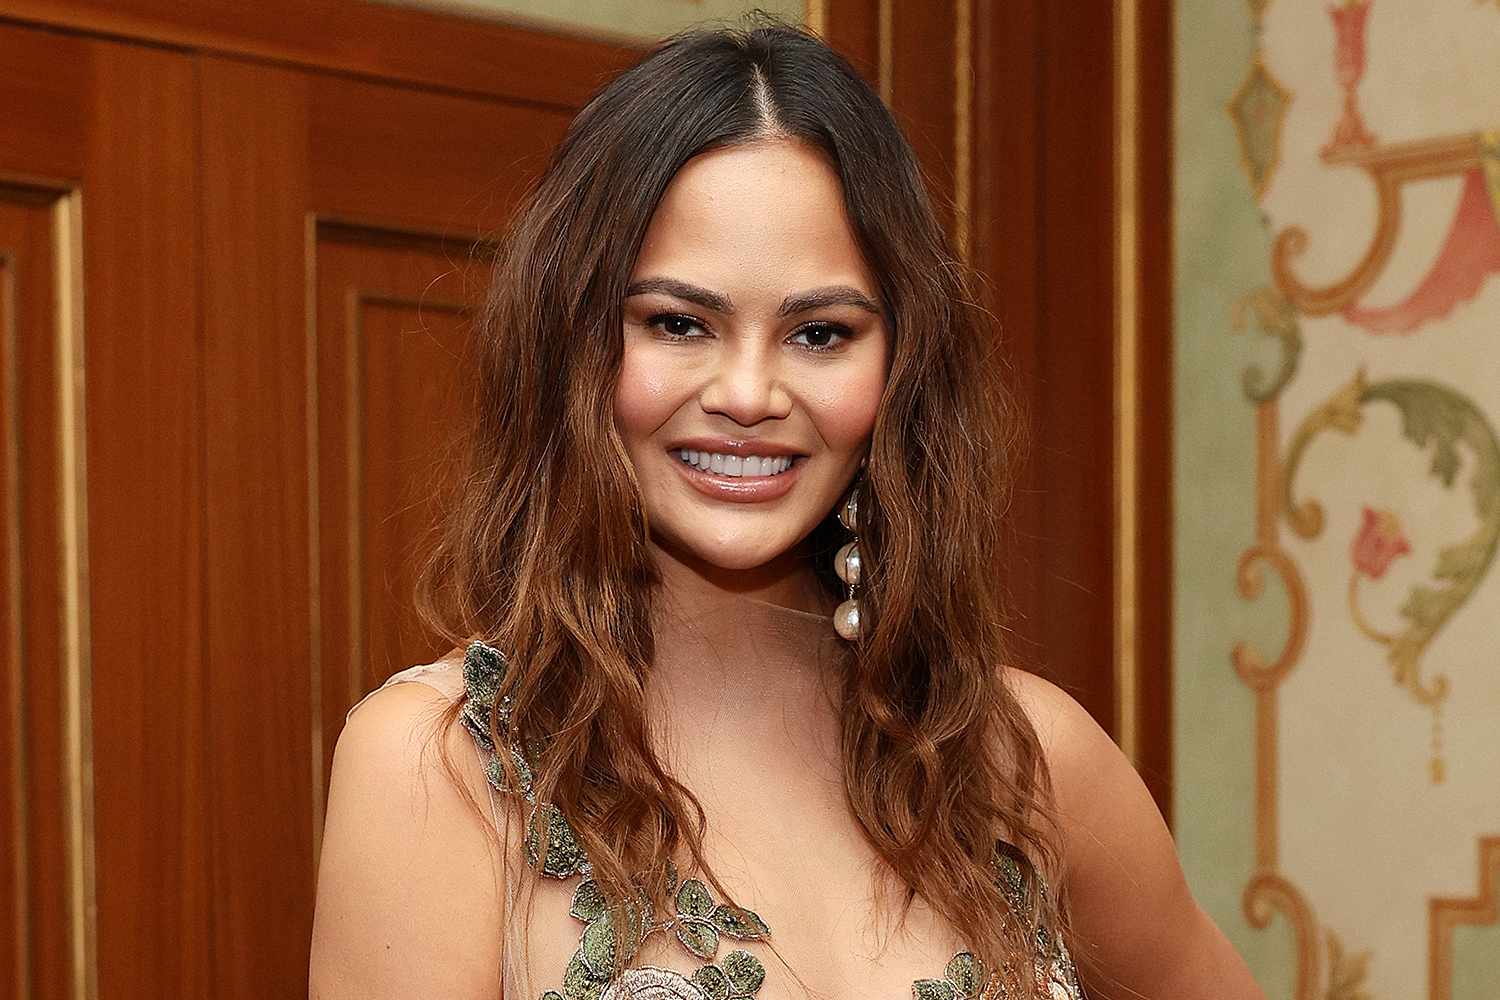 Chrissy Teigen Covers “SI Swimsuit” in Barely There One-Piece 10 Years After Her Last Sexy Appearance